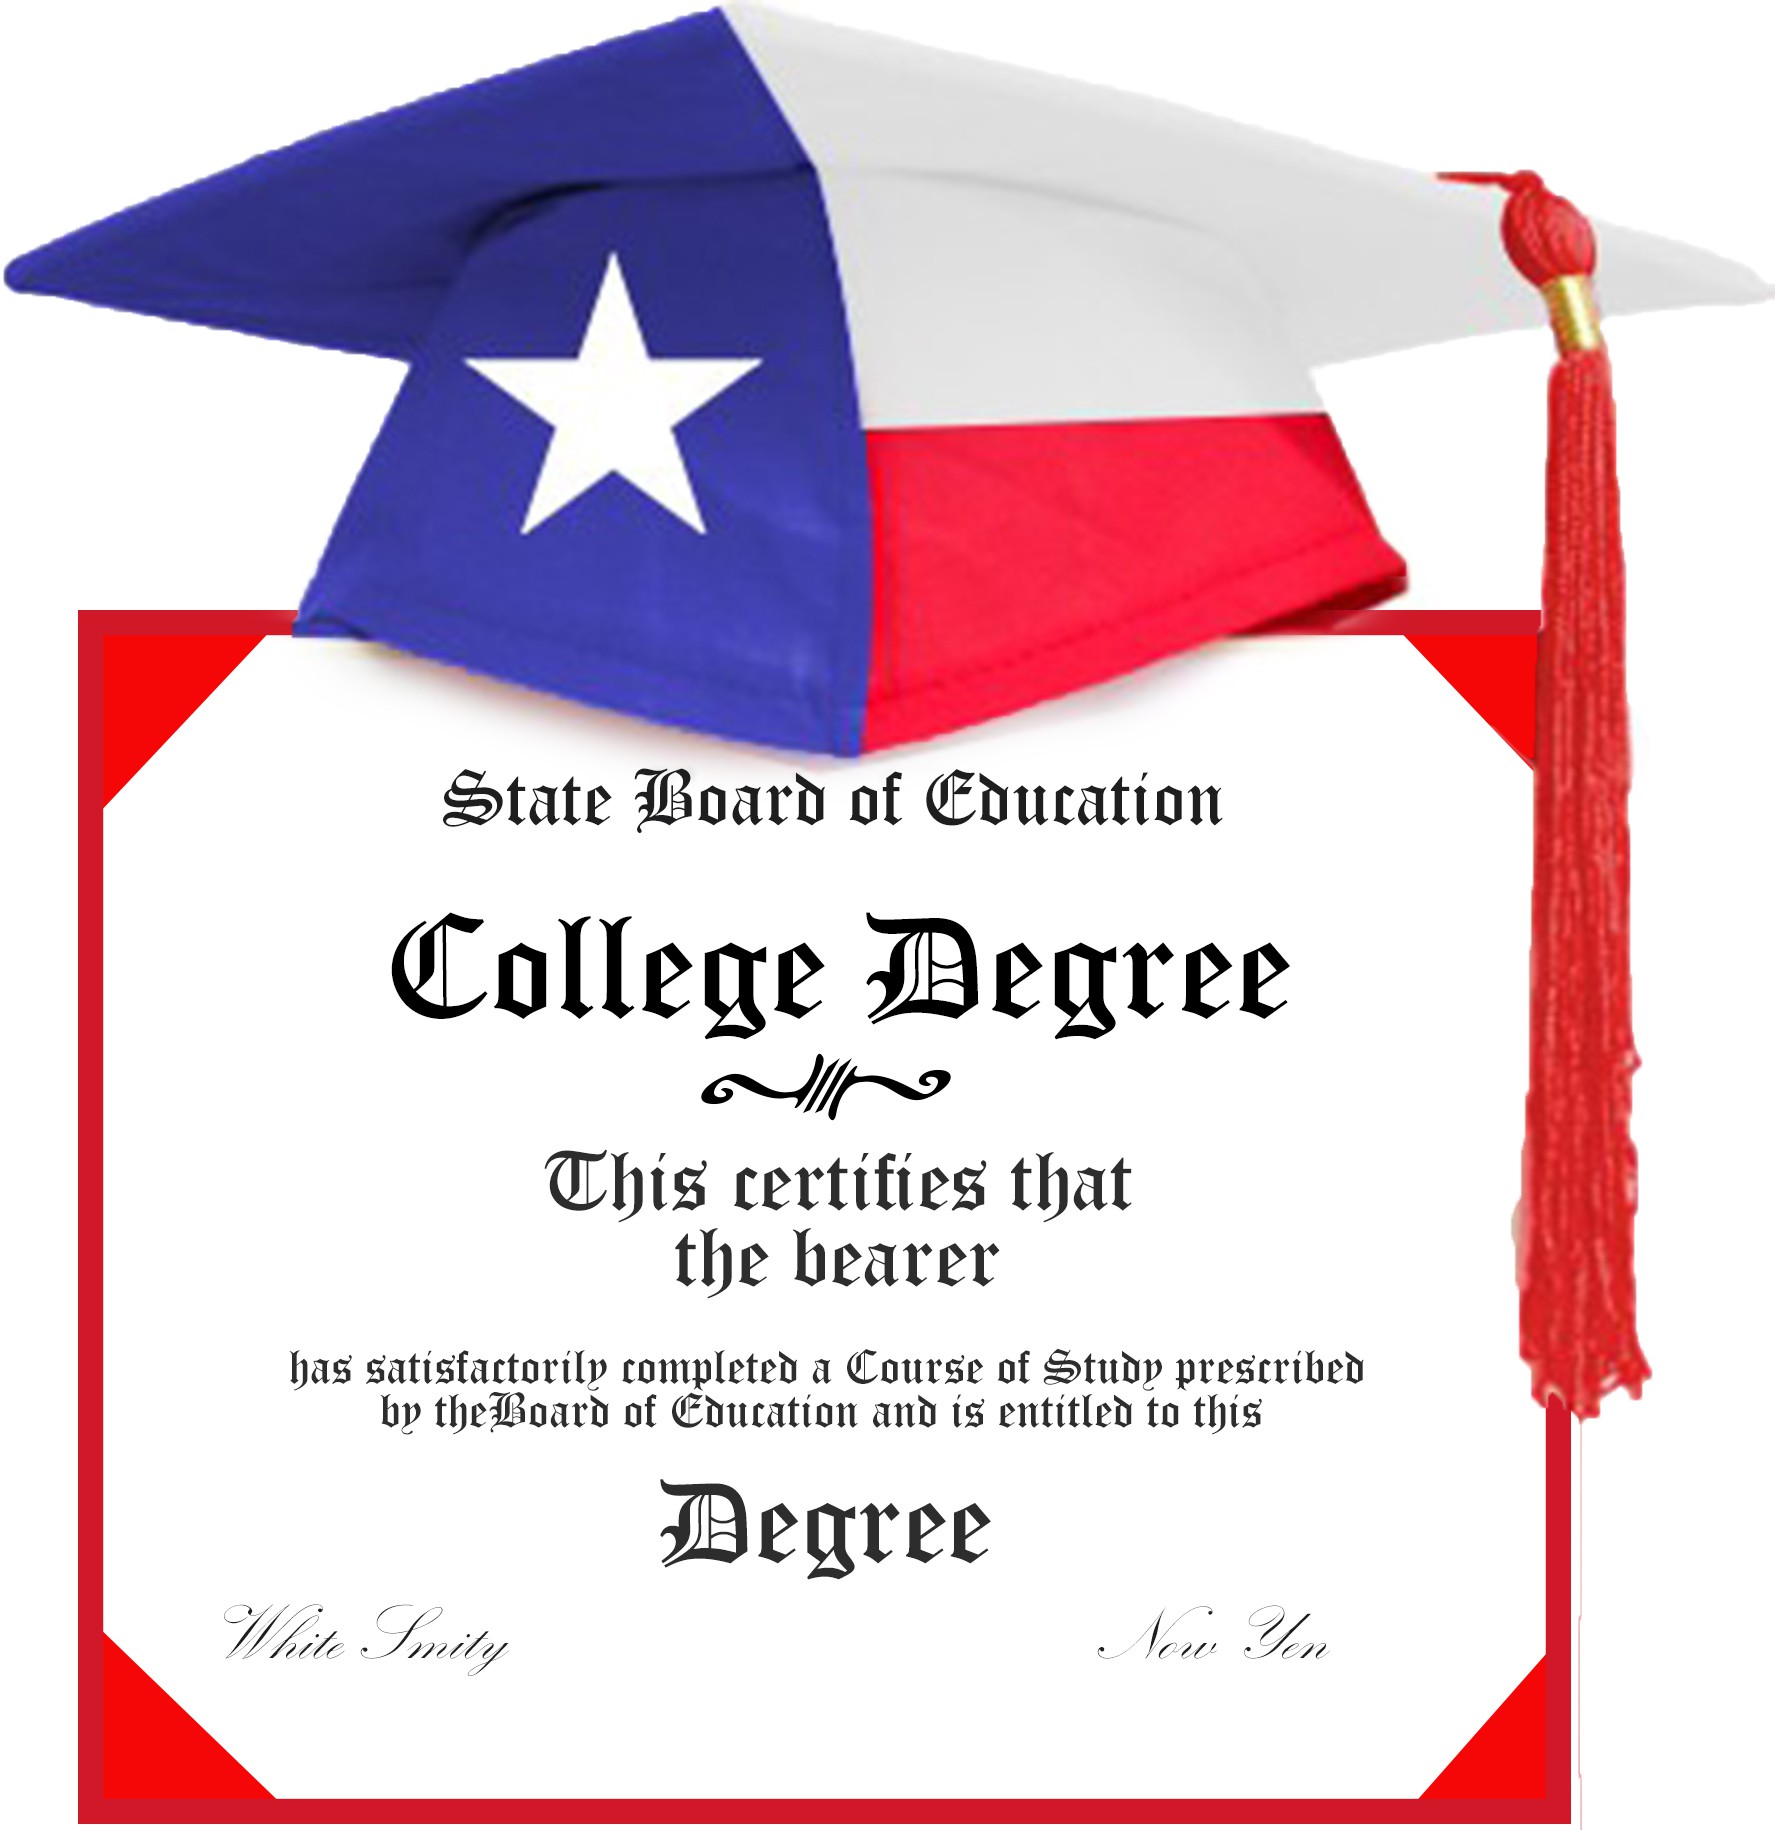 The University of Texas Pan American College Degree